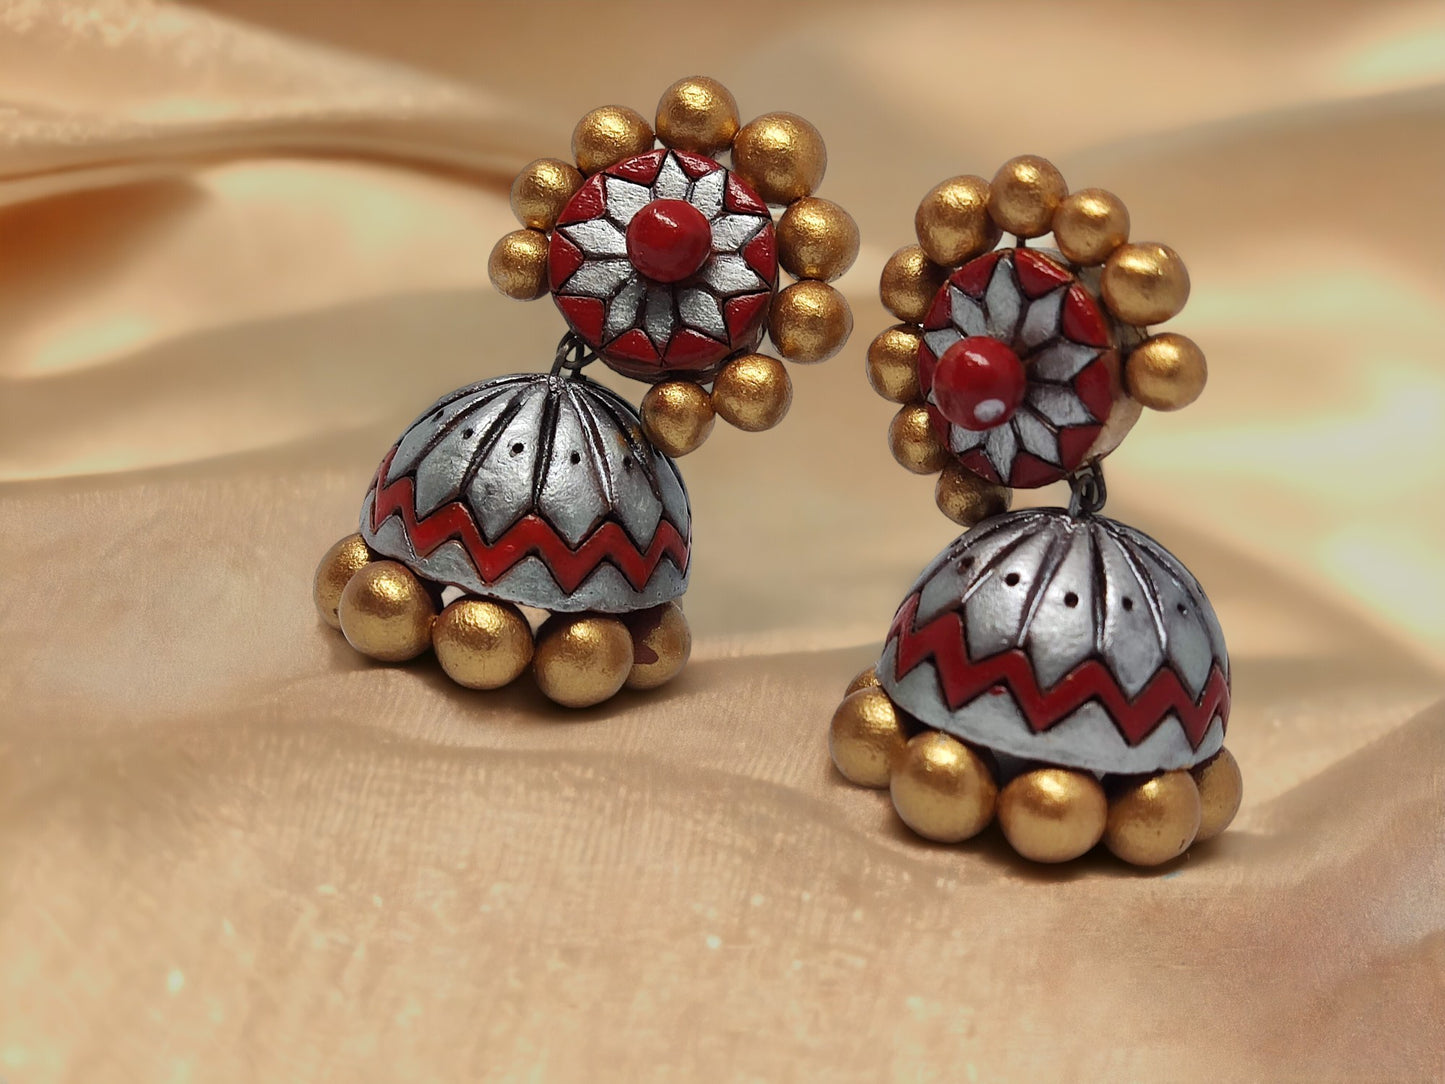 <p data-mce-fragment="1">Elevate your style with Aamodini Terracotta Jhumkas, inspired by nature and made from natural earthen clay. These handcrafted earrings from anusangicollections are perfect for those with metal allergies, as they are skin-friendly. Add a touch of elegance to any outfit with our color-customizable jhumkas.</p>